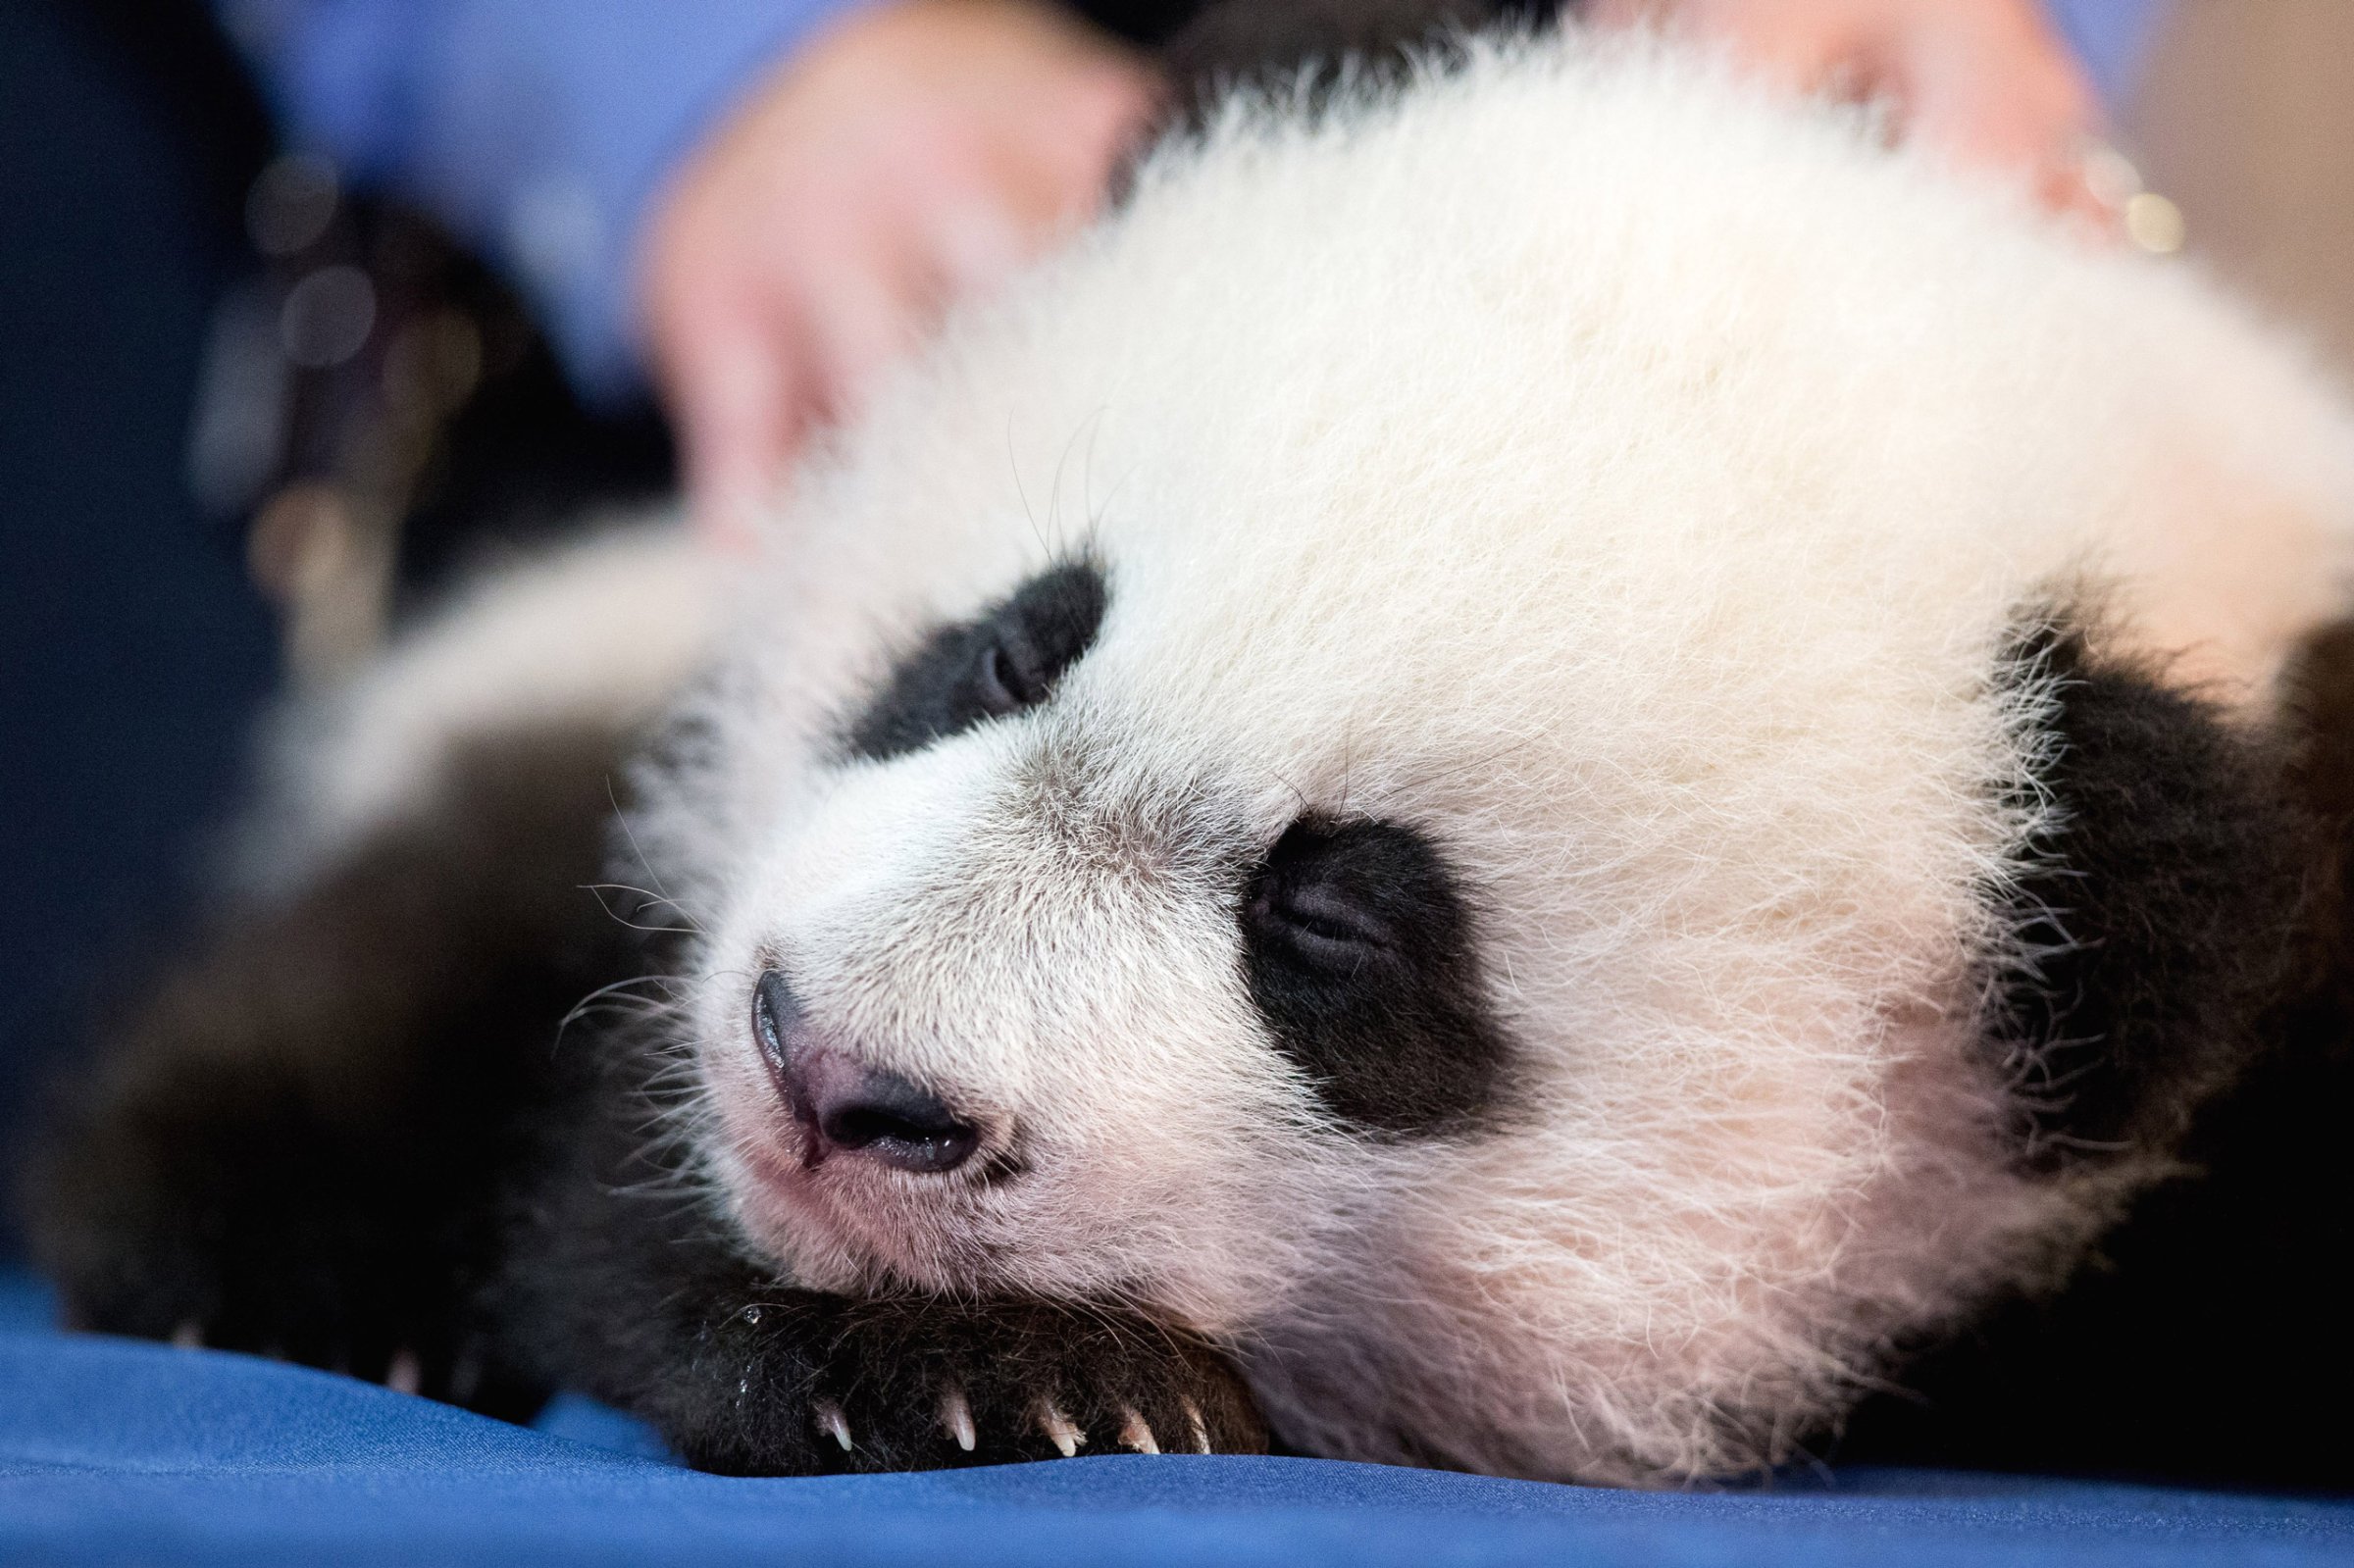 Bei Bei Bei, the National Zoo's newest panda and offspring of Mei Xiang and Tian Tian, falls asleep while being presented for members of the media at the National Zoo in Washington, Monday, Dec. 14, 2015. Bei Bei will be making his public debut on January 16, 2016. (AP Photo/Andrew Harnik)